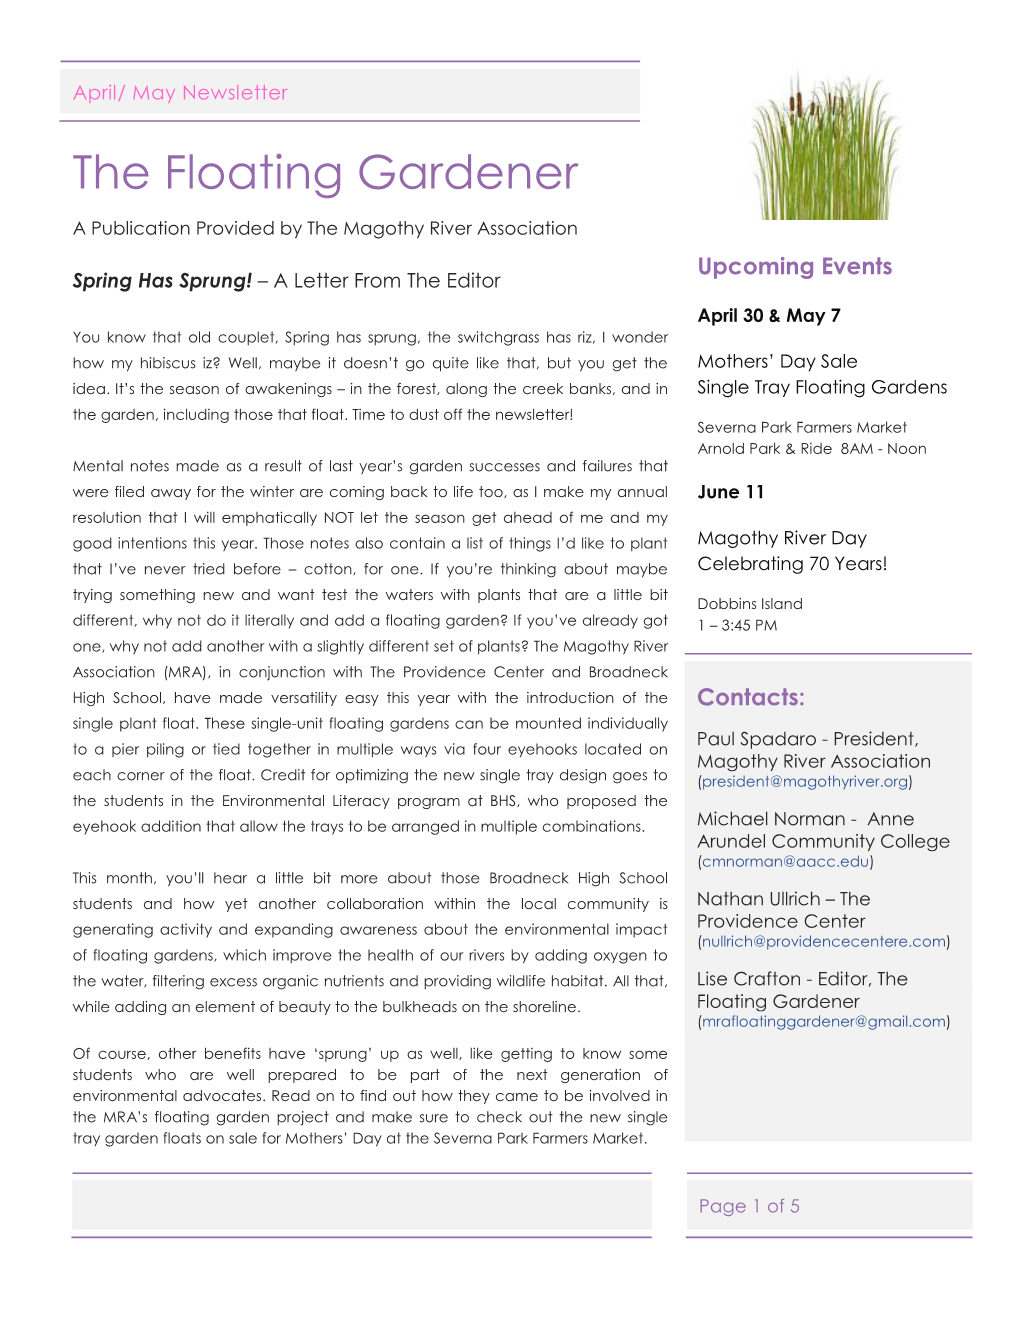 The Floating Gardener May 2016